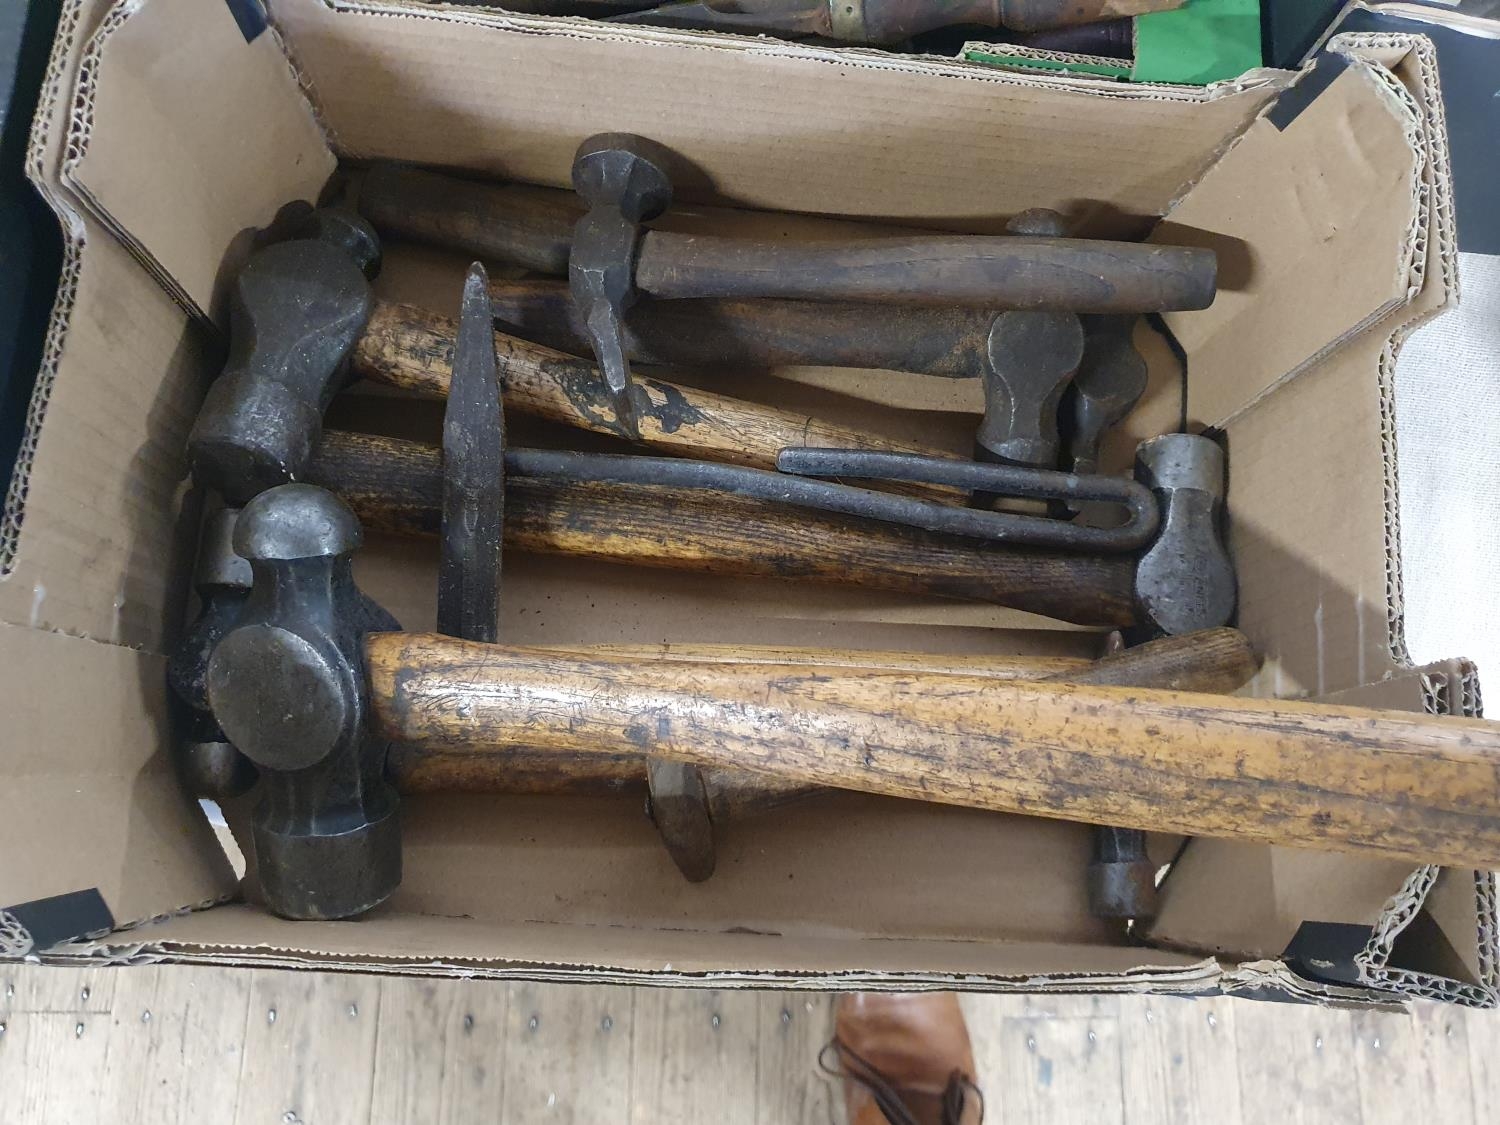 A job lot of hammers. Shipping unavailable